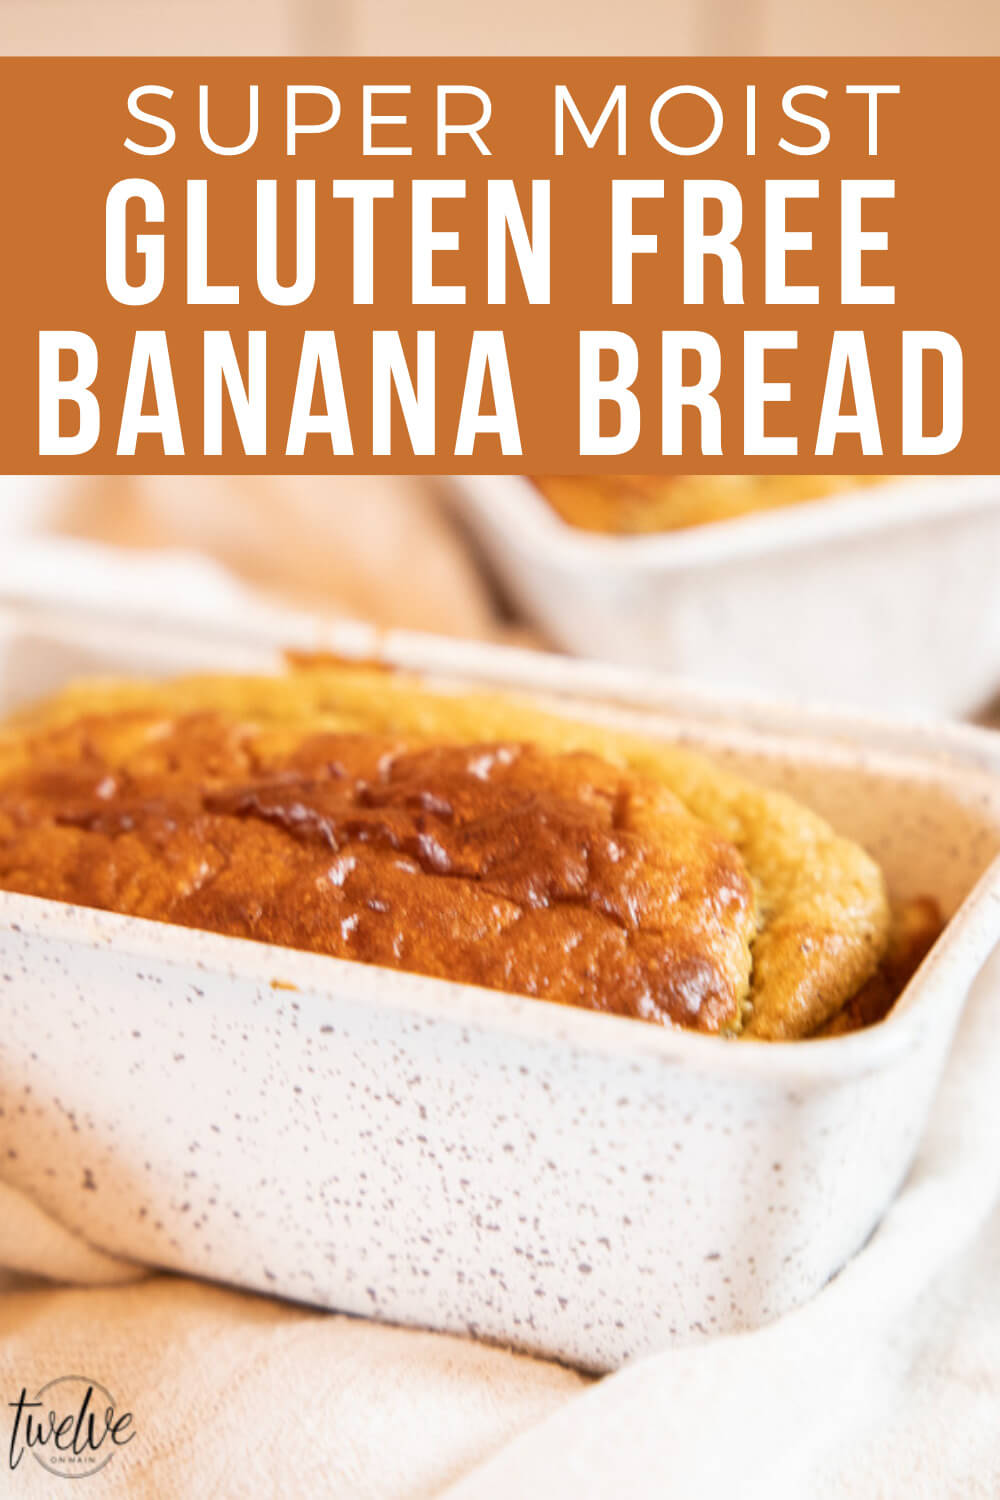 Amazingly delicious and moist gluten free banana bread!  This oatmeal banana bread recipe is so easy to make and tastes amazing! The best part is, you probably have all these simple ingredients already in your kitchen.